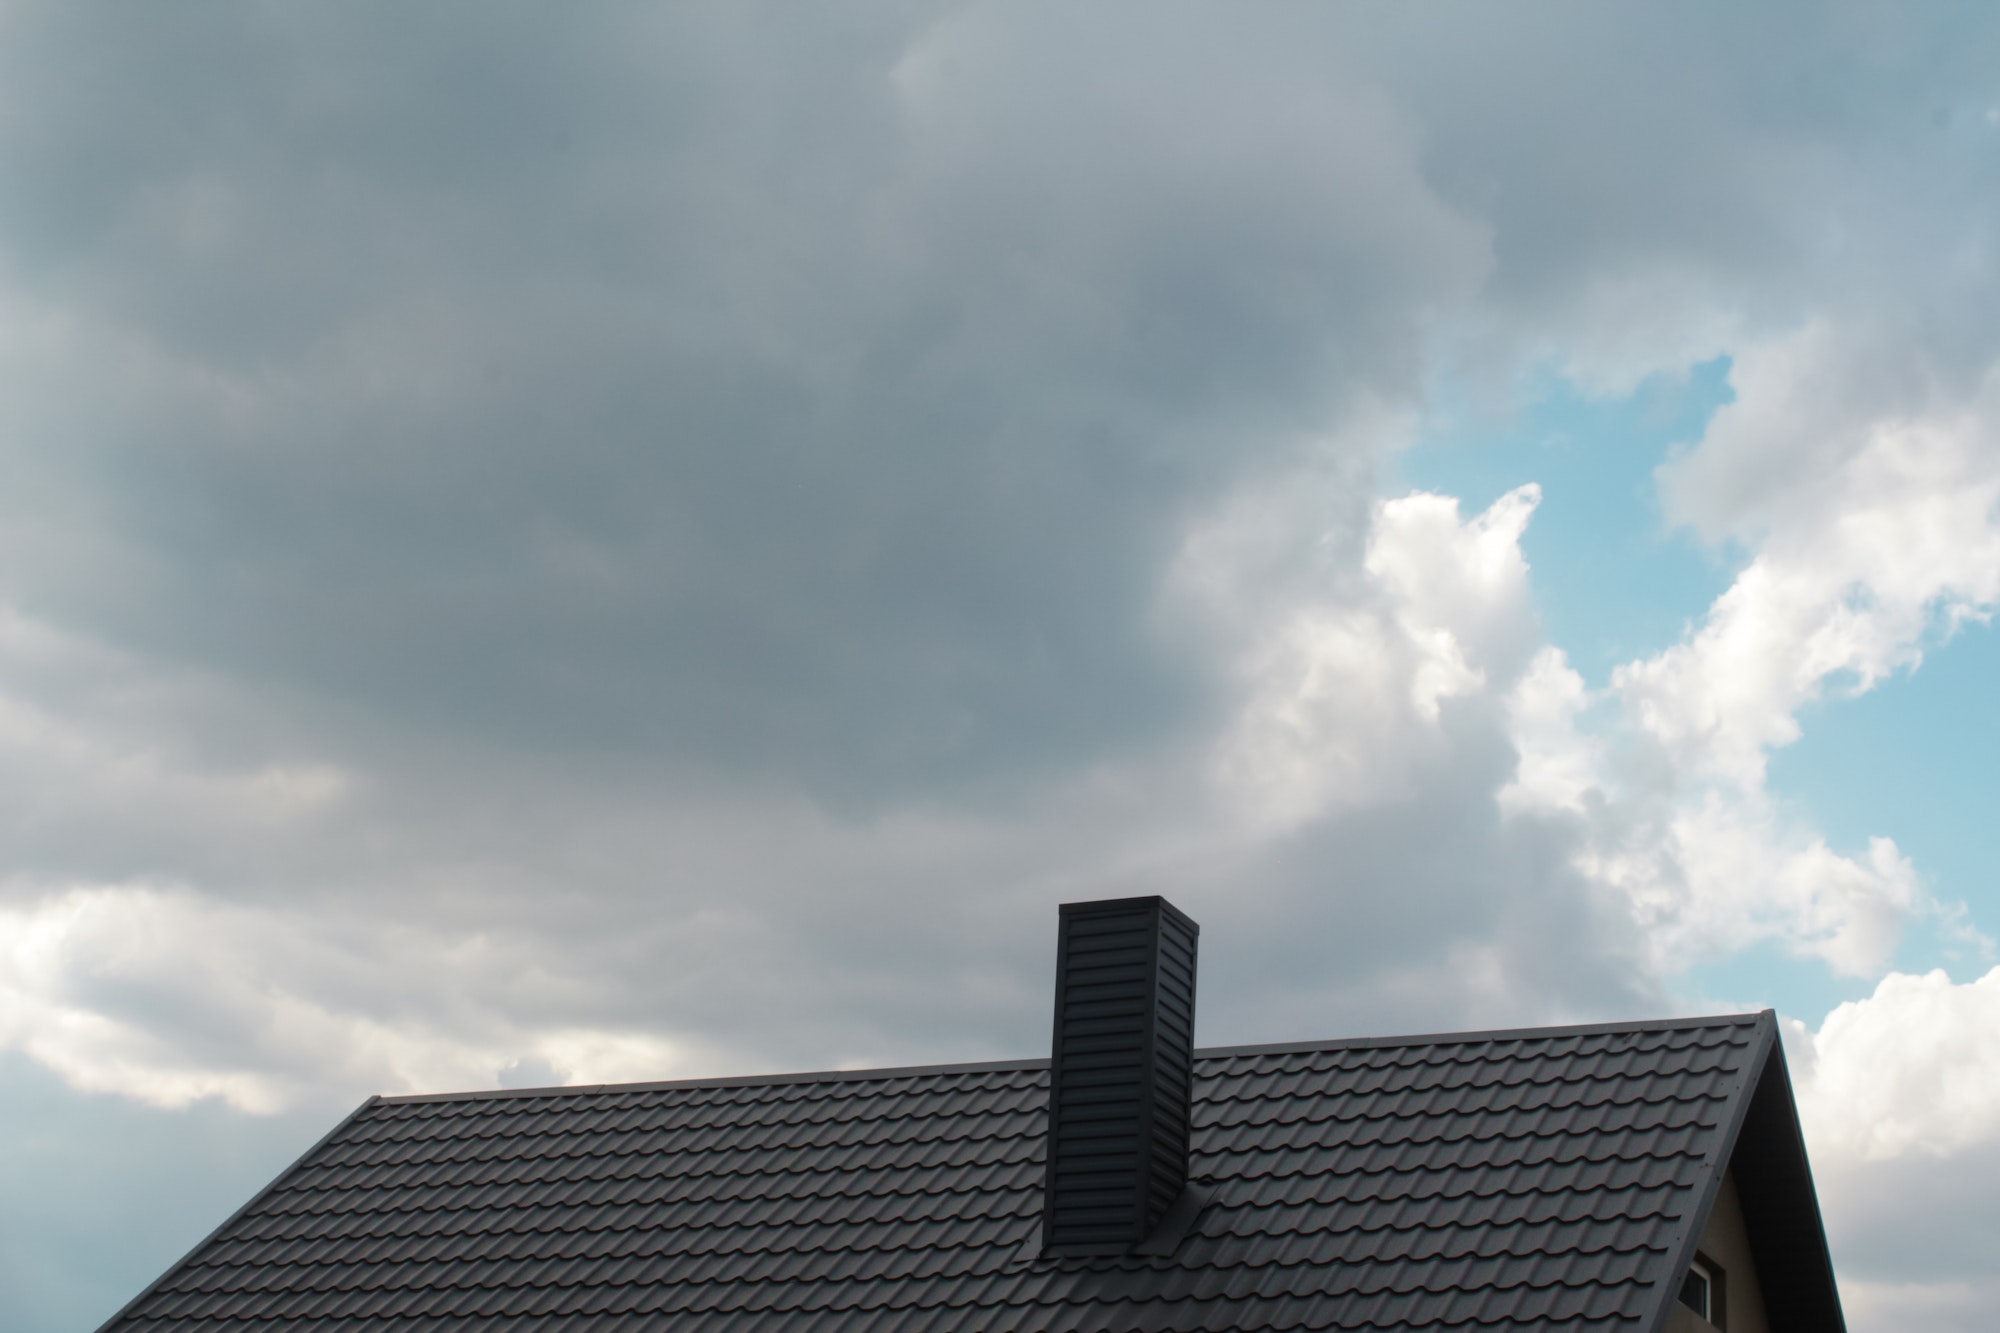 steel roof on dark sky background. Dark rain clouds above the modern roof. Roof with new black roofi